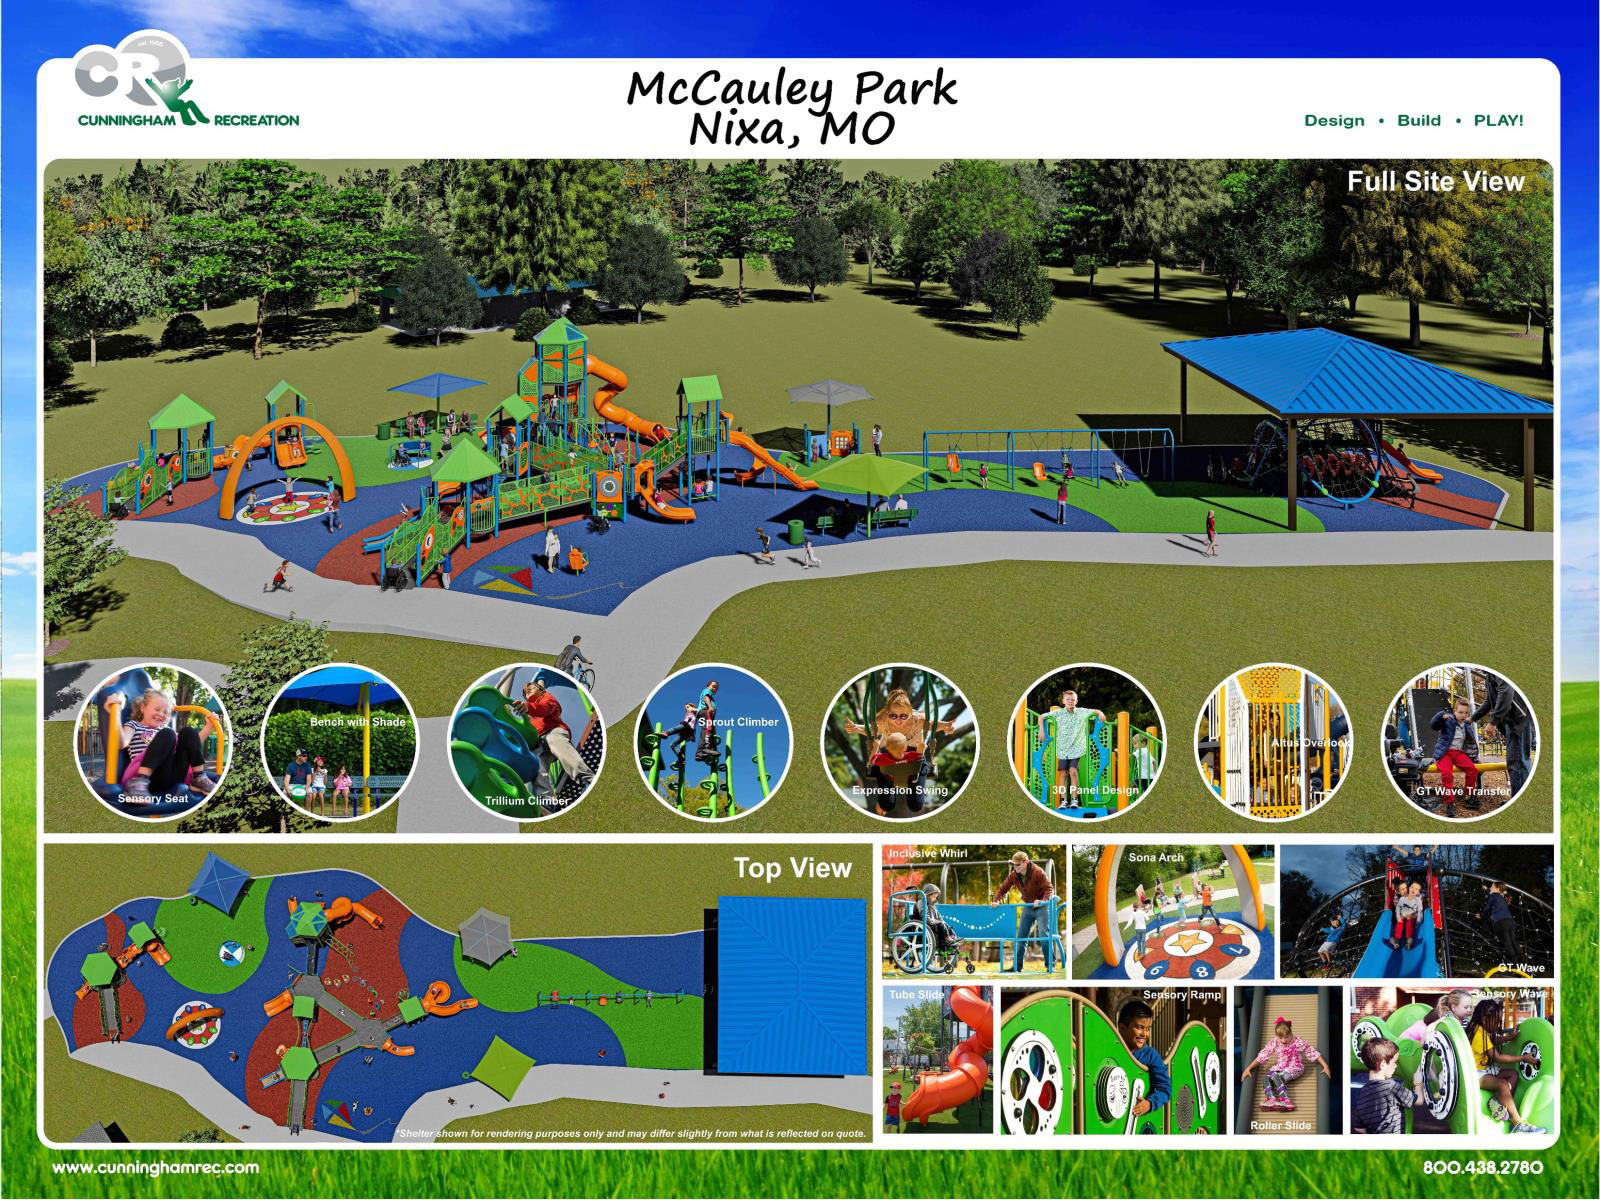 mcauley park poster with sketches